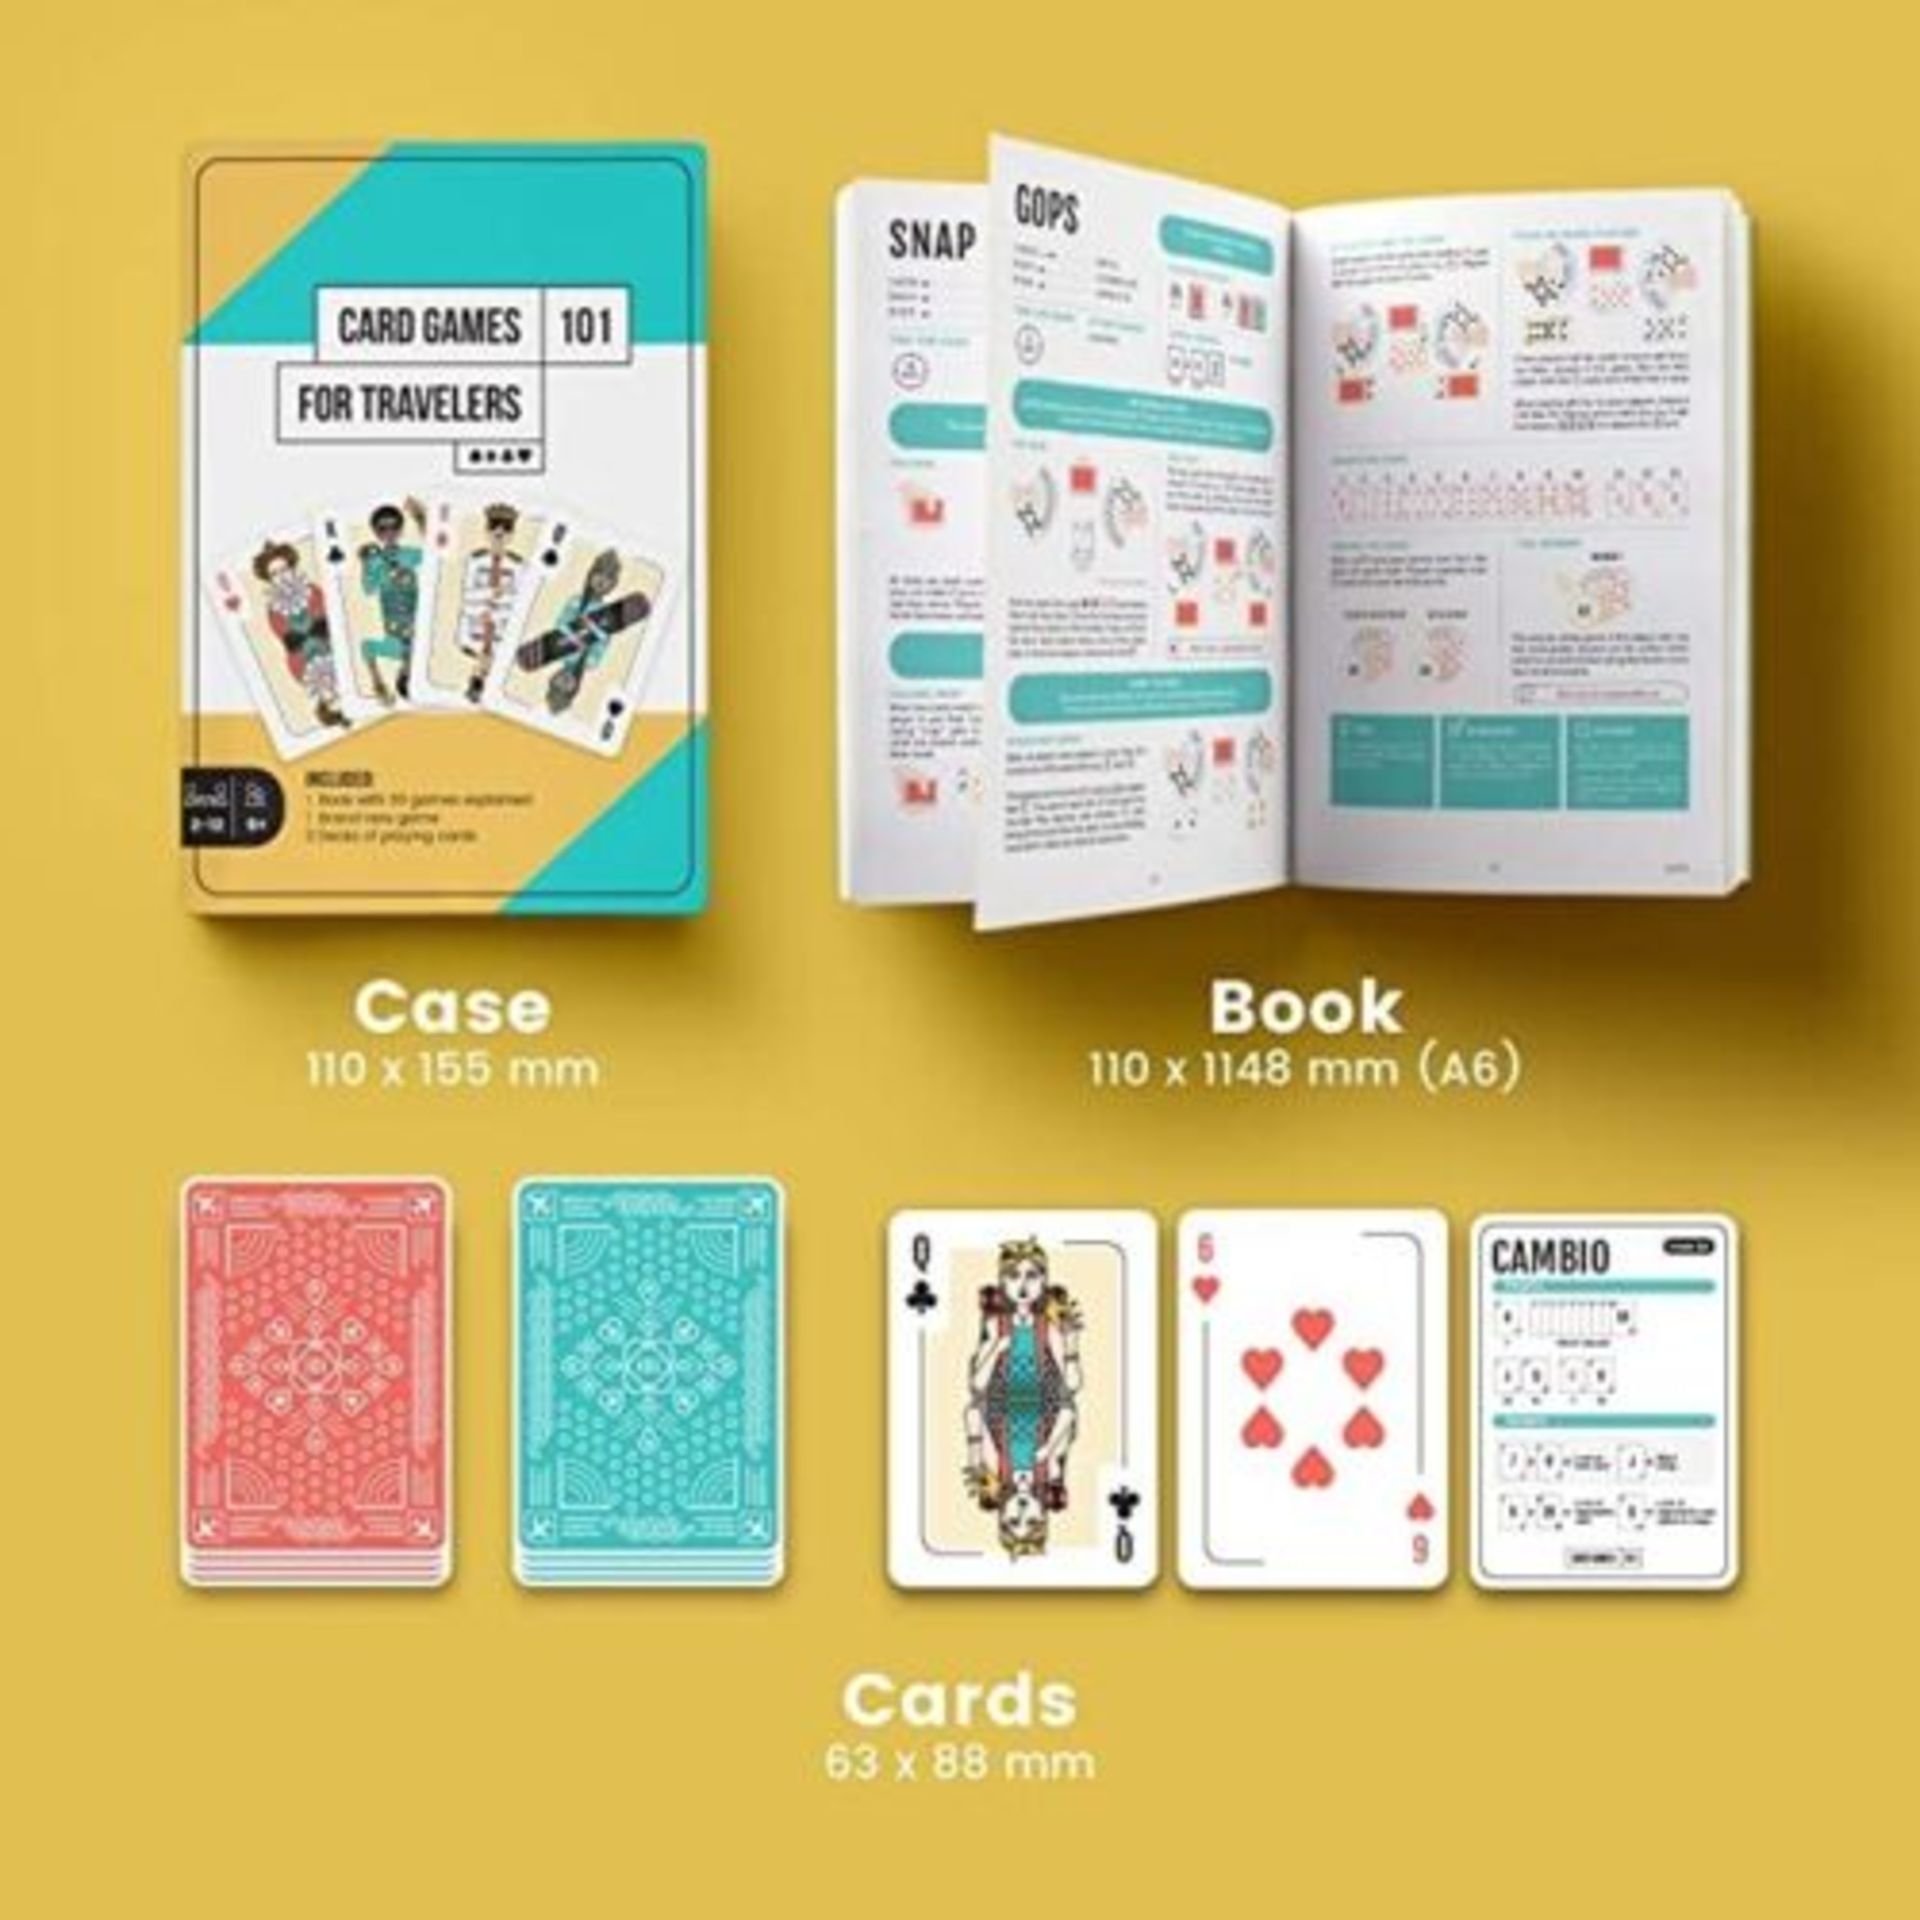 3x Card Games For Travelers Box Sets, 2 Decks of Cards & Book With 30 Classic Games - RRP £60